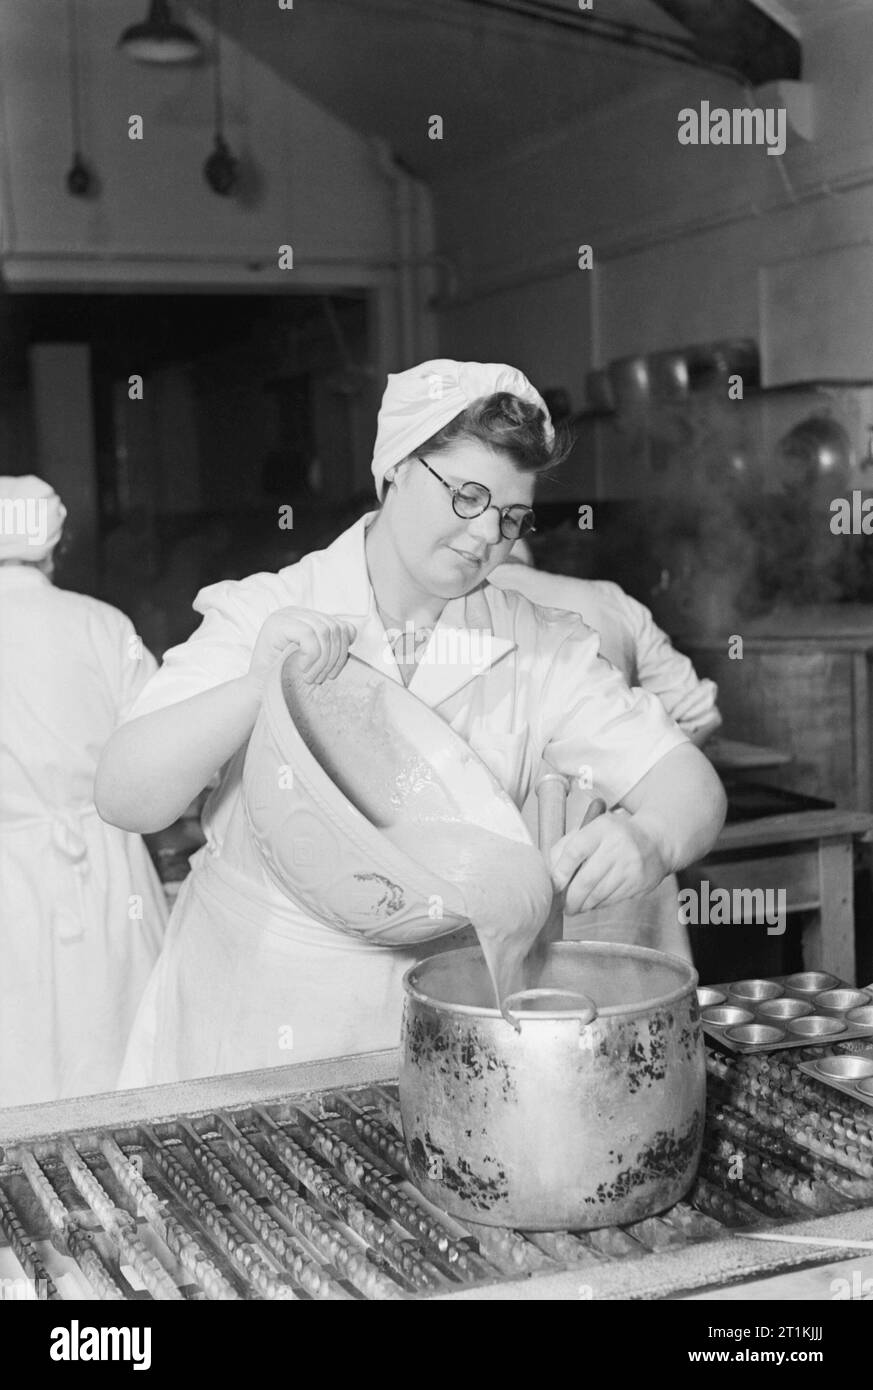 https://c8.alamy.com/comp/2T1KJJJ/a-pupil-at-the-national-training-college-of-domestic-science-in-westminster-london-in-a-cookery-class-1944-a-pupil-at-the-national-training-college-of-domestic-science-pours-a-tomato-sauce-mixture-from-a-large-mixing-bowl-into-a-large-cooking-pot-in-one-of-the-kitchens-at-the-college-2T1KJJJ.jpg